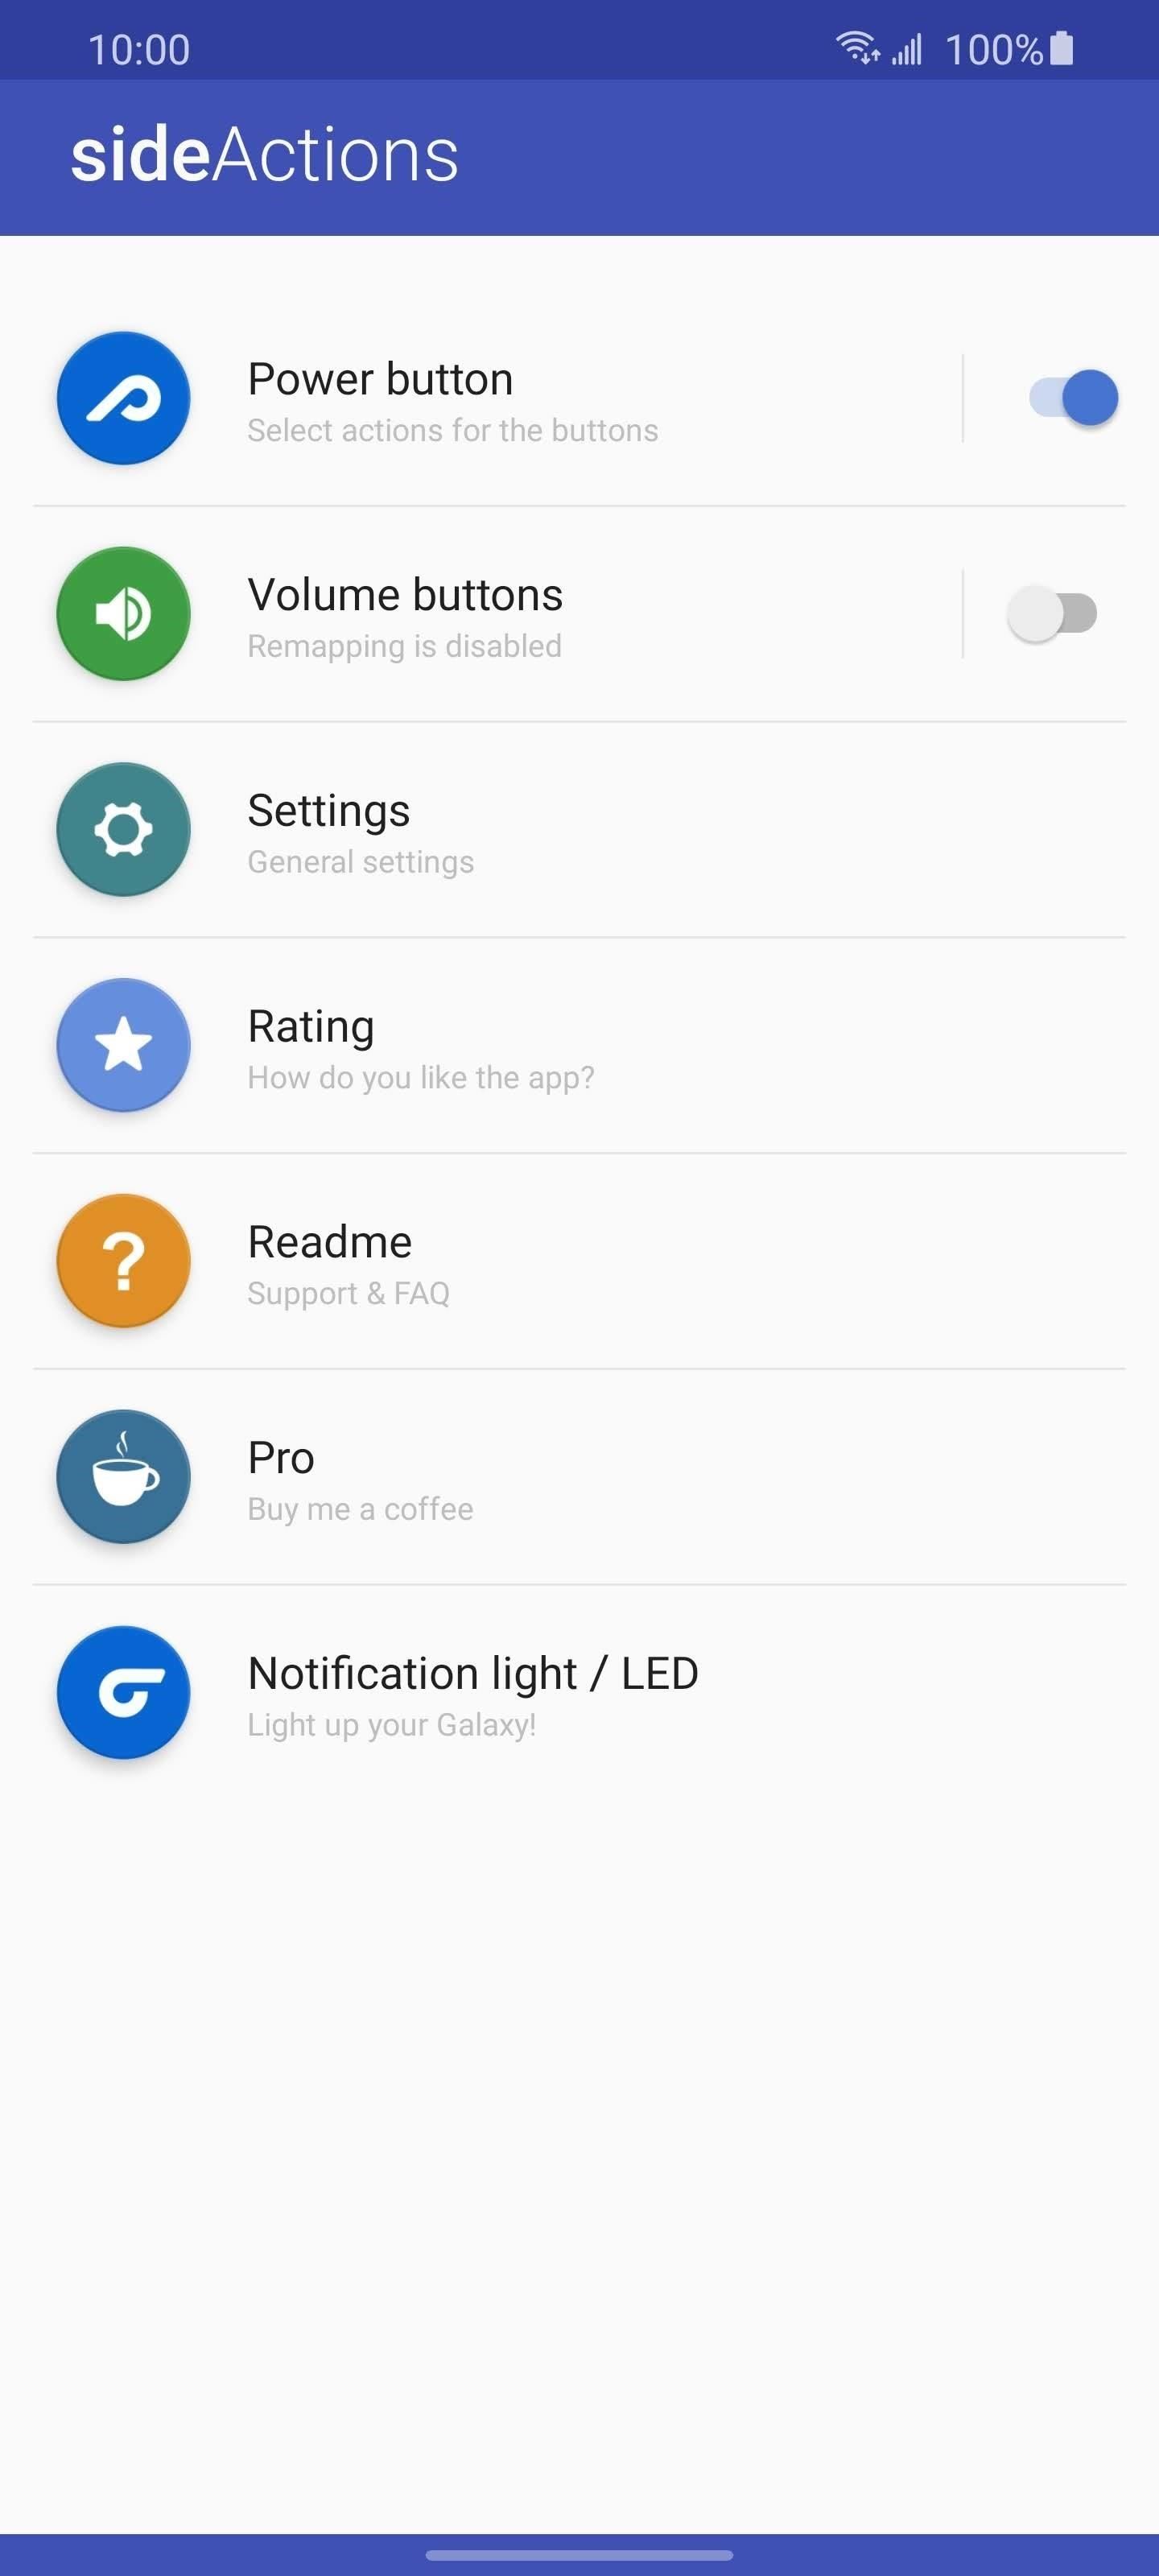 How to Remap Your Galaxy S20's Power Button to Launch Any App or Action